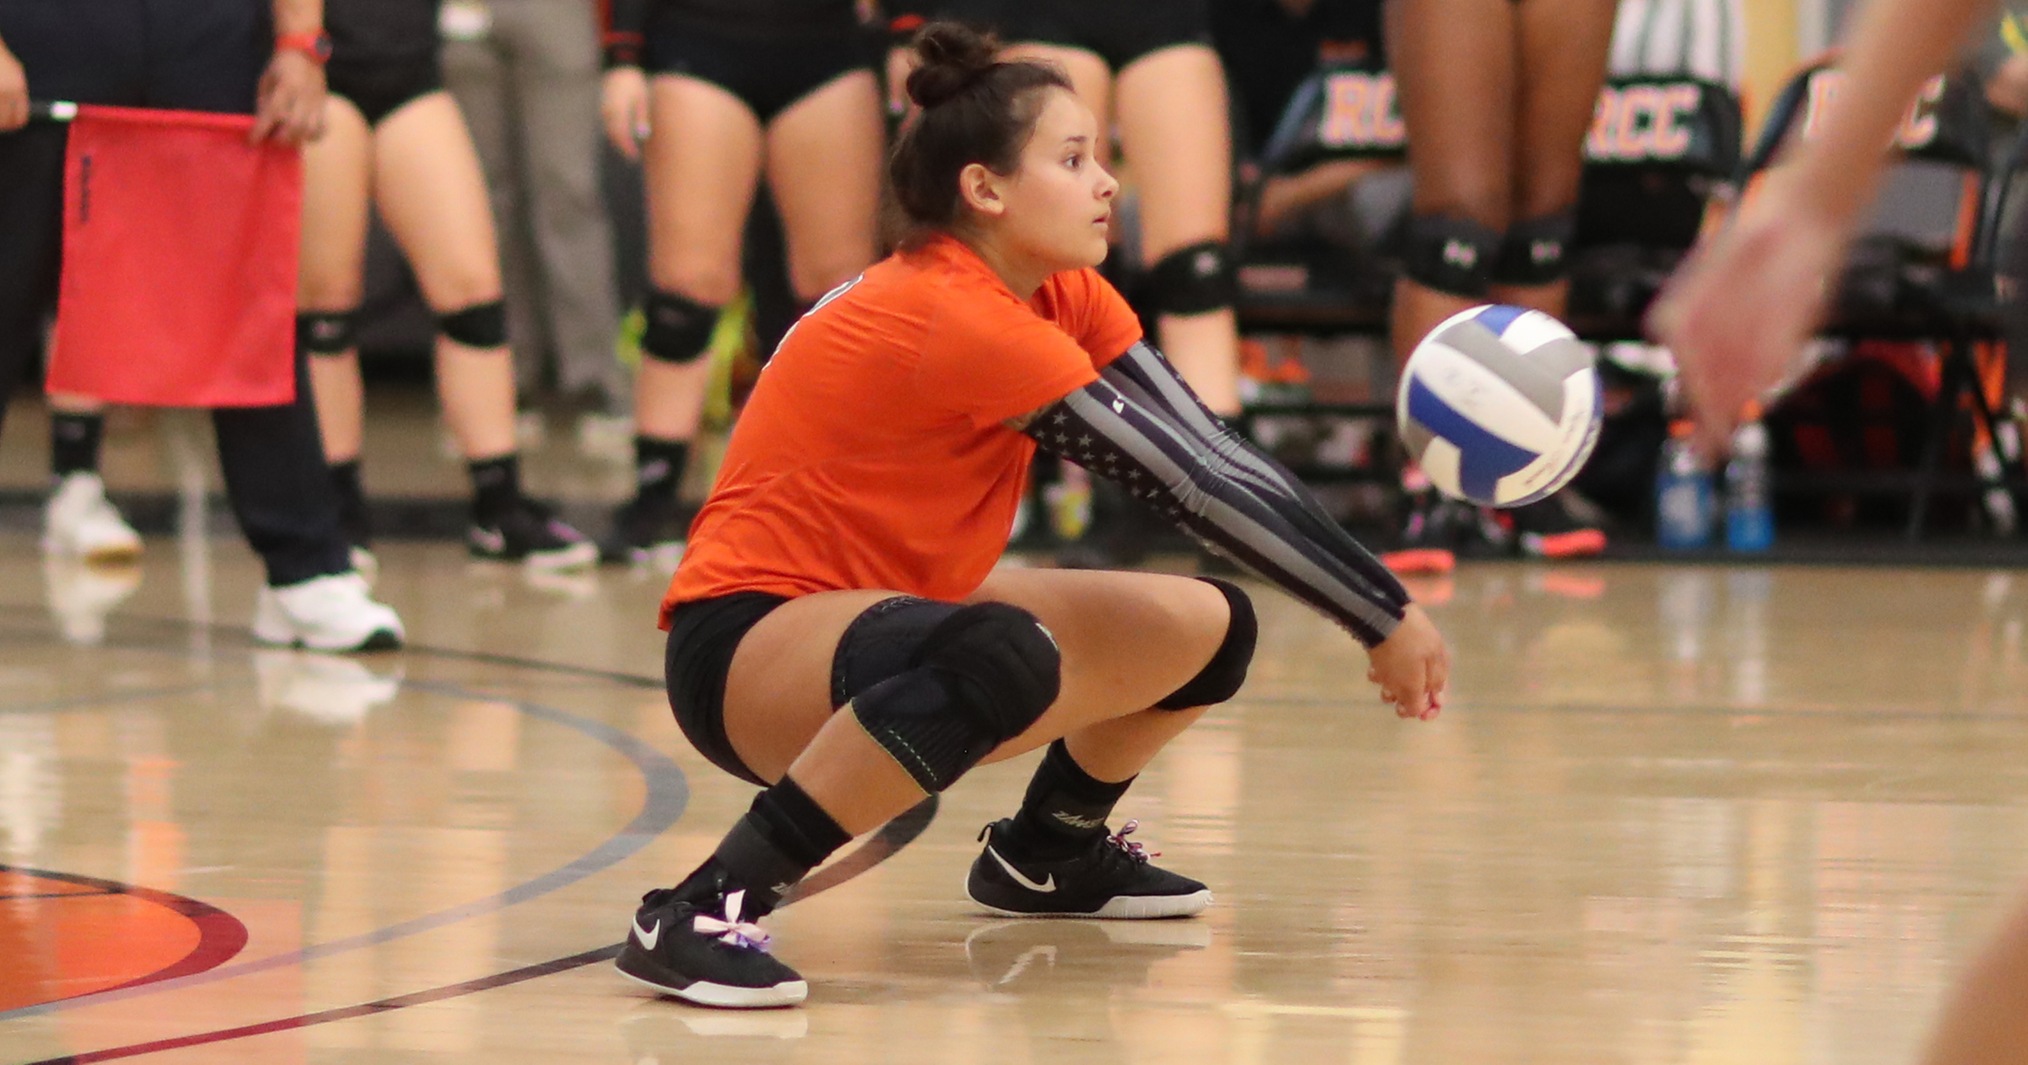 Sadie Arganda recorded a career-high 30 digs in a five set victory over Golden West. (Photo by Bobby R. Hester)